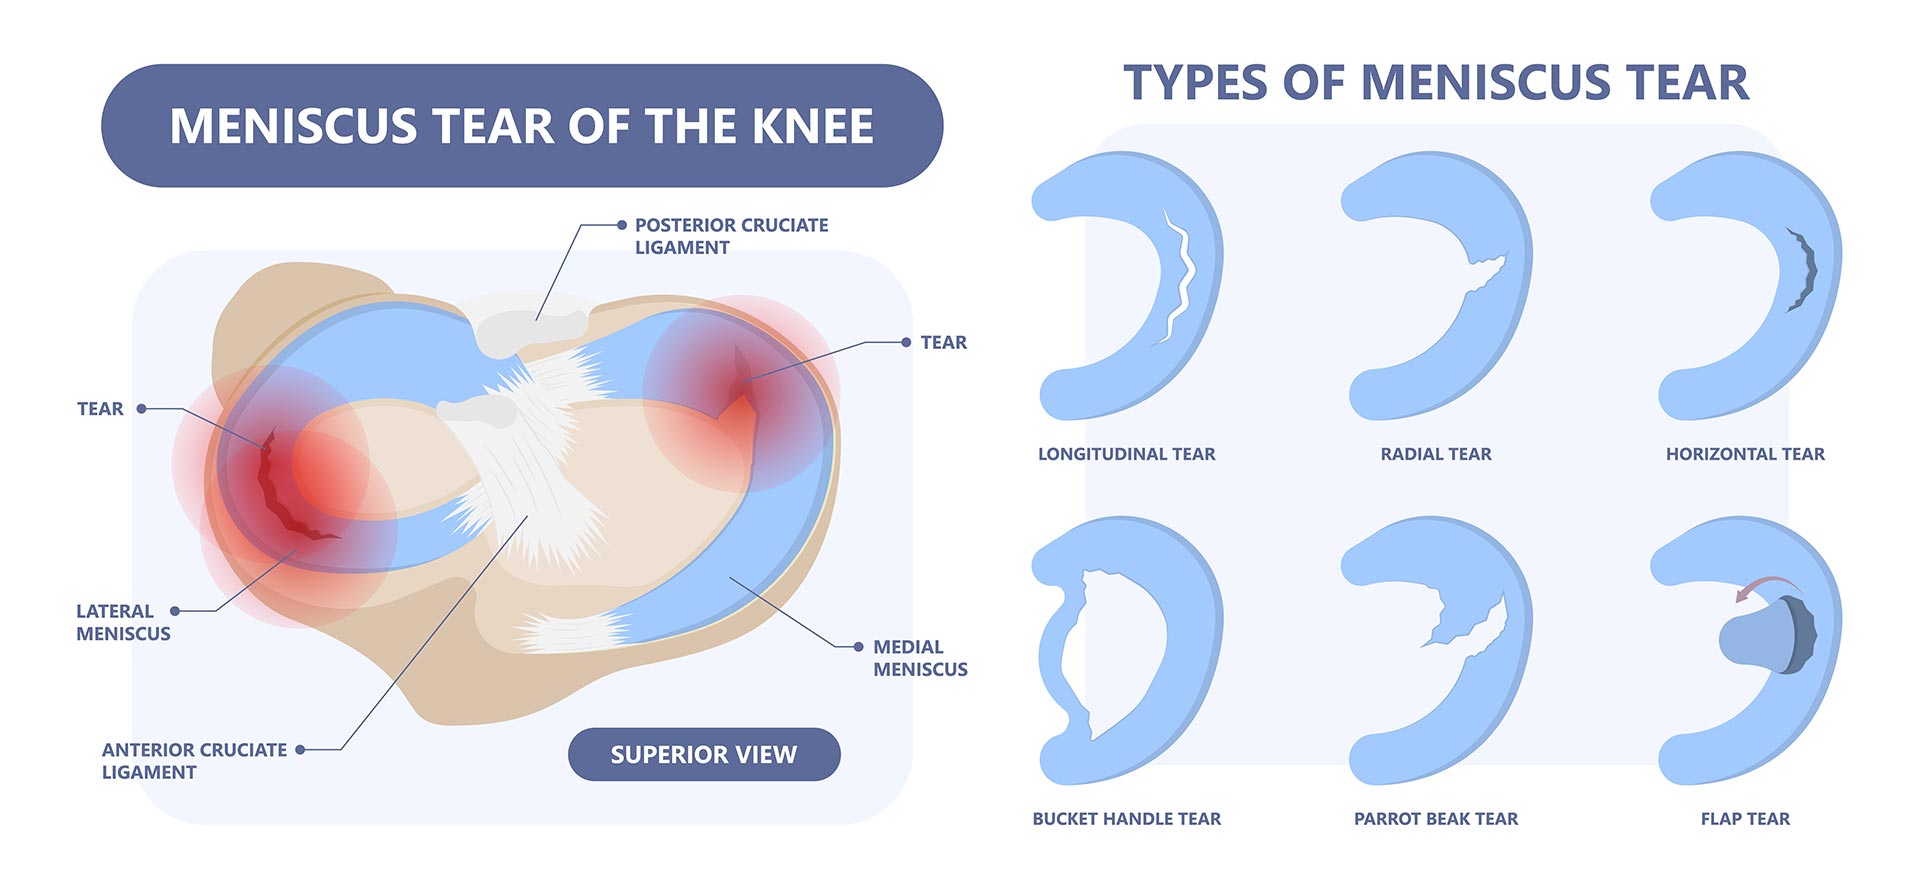 Signs Of A Torn Meniscus Offers, Save 55% | jlcatj.gob.mx